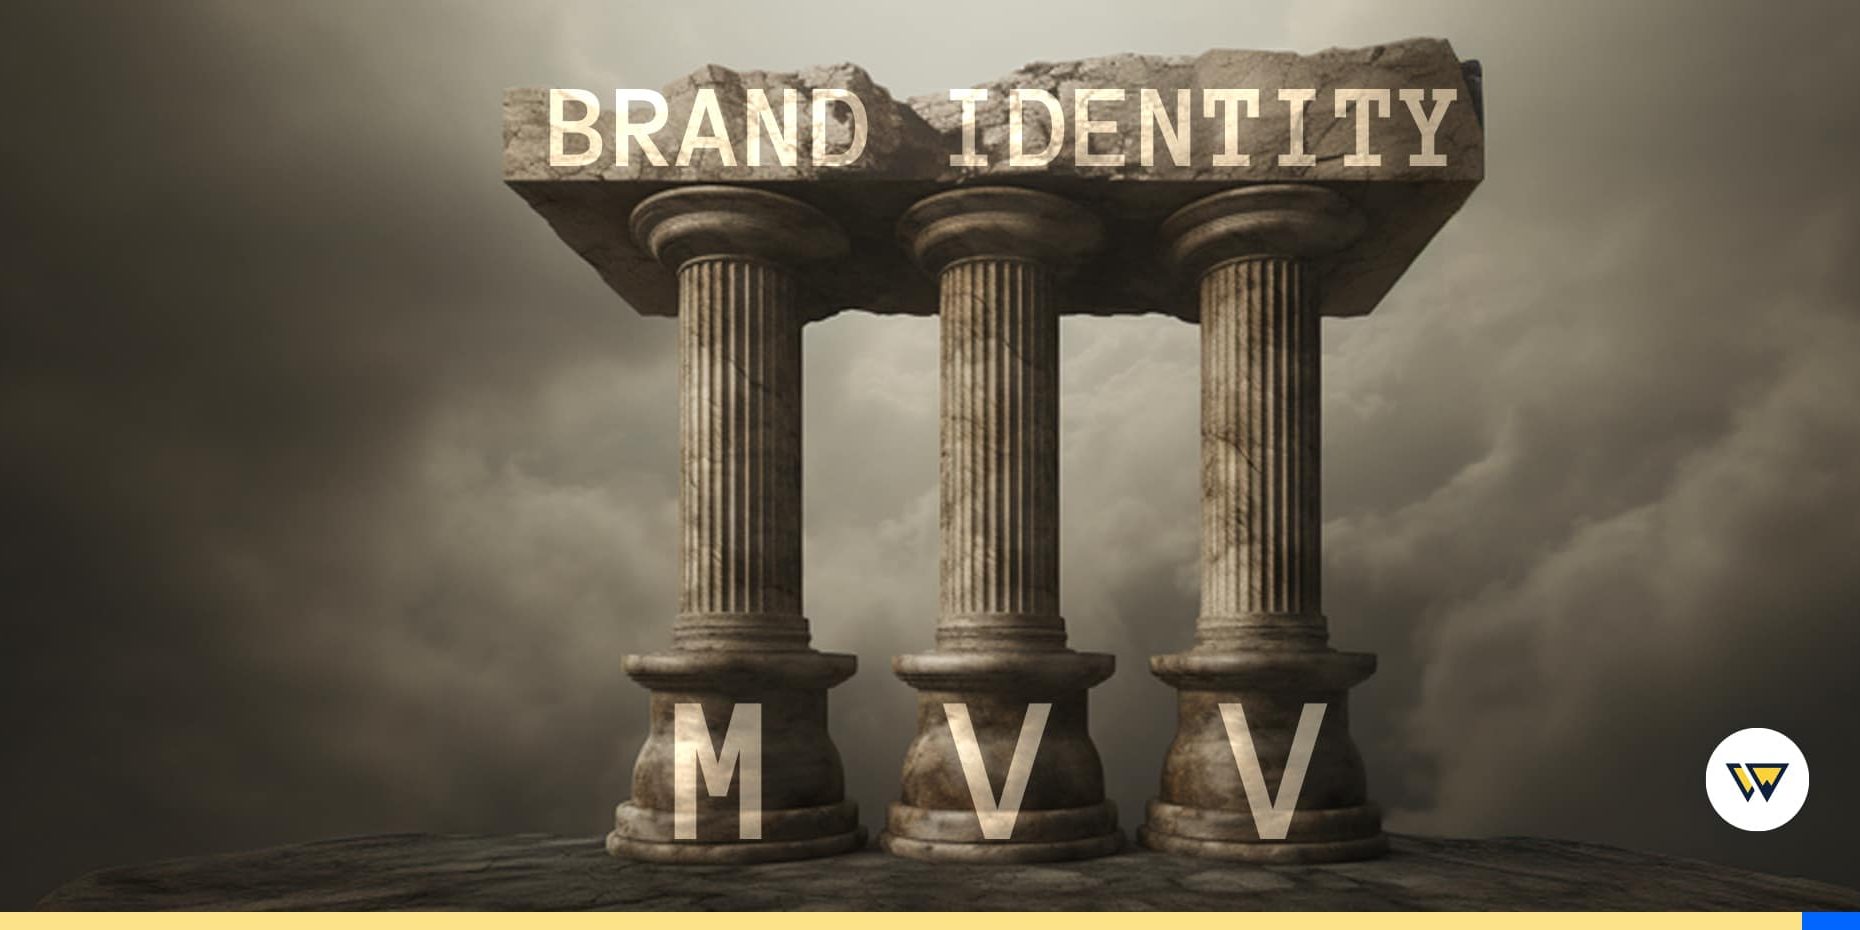 How Bold Mission, Vision, and Values Statements Strengthen Your Brand Identity